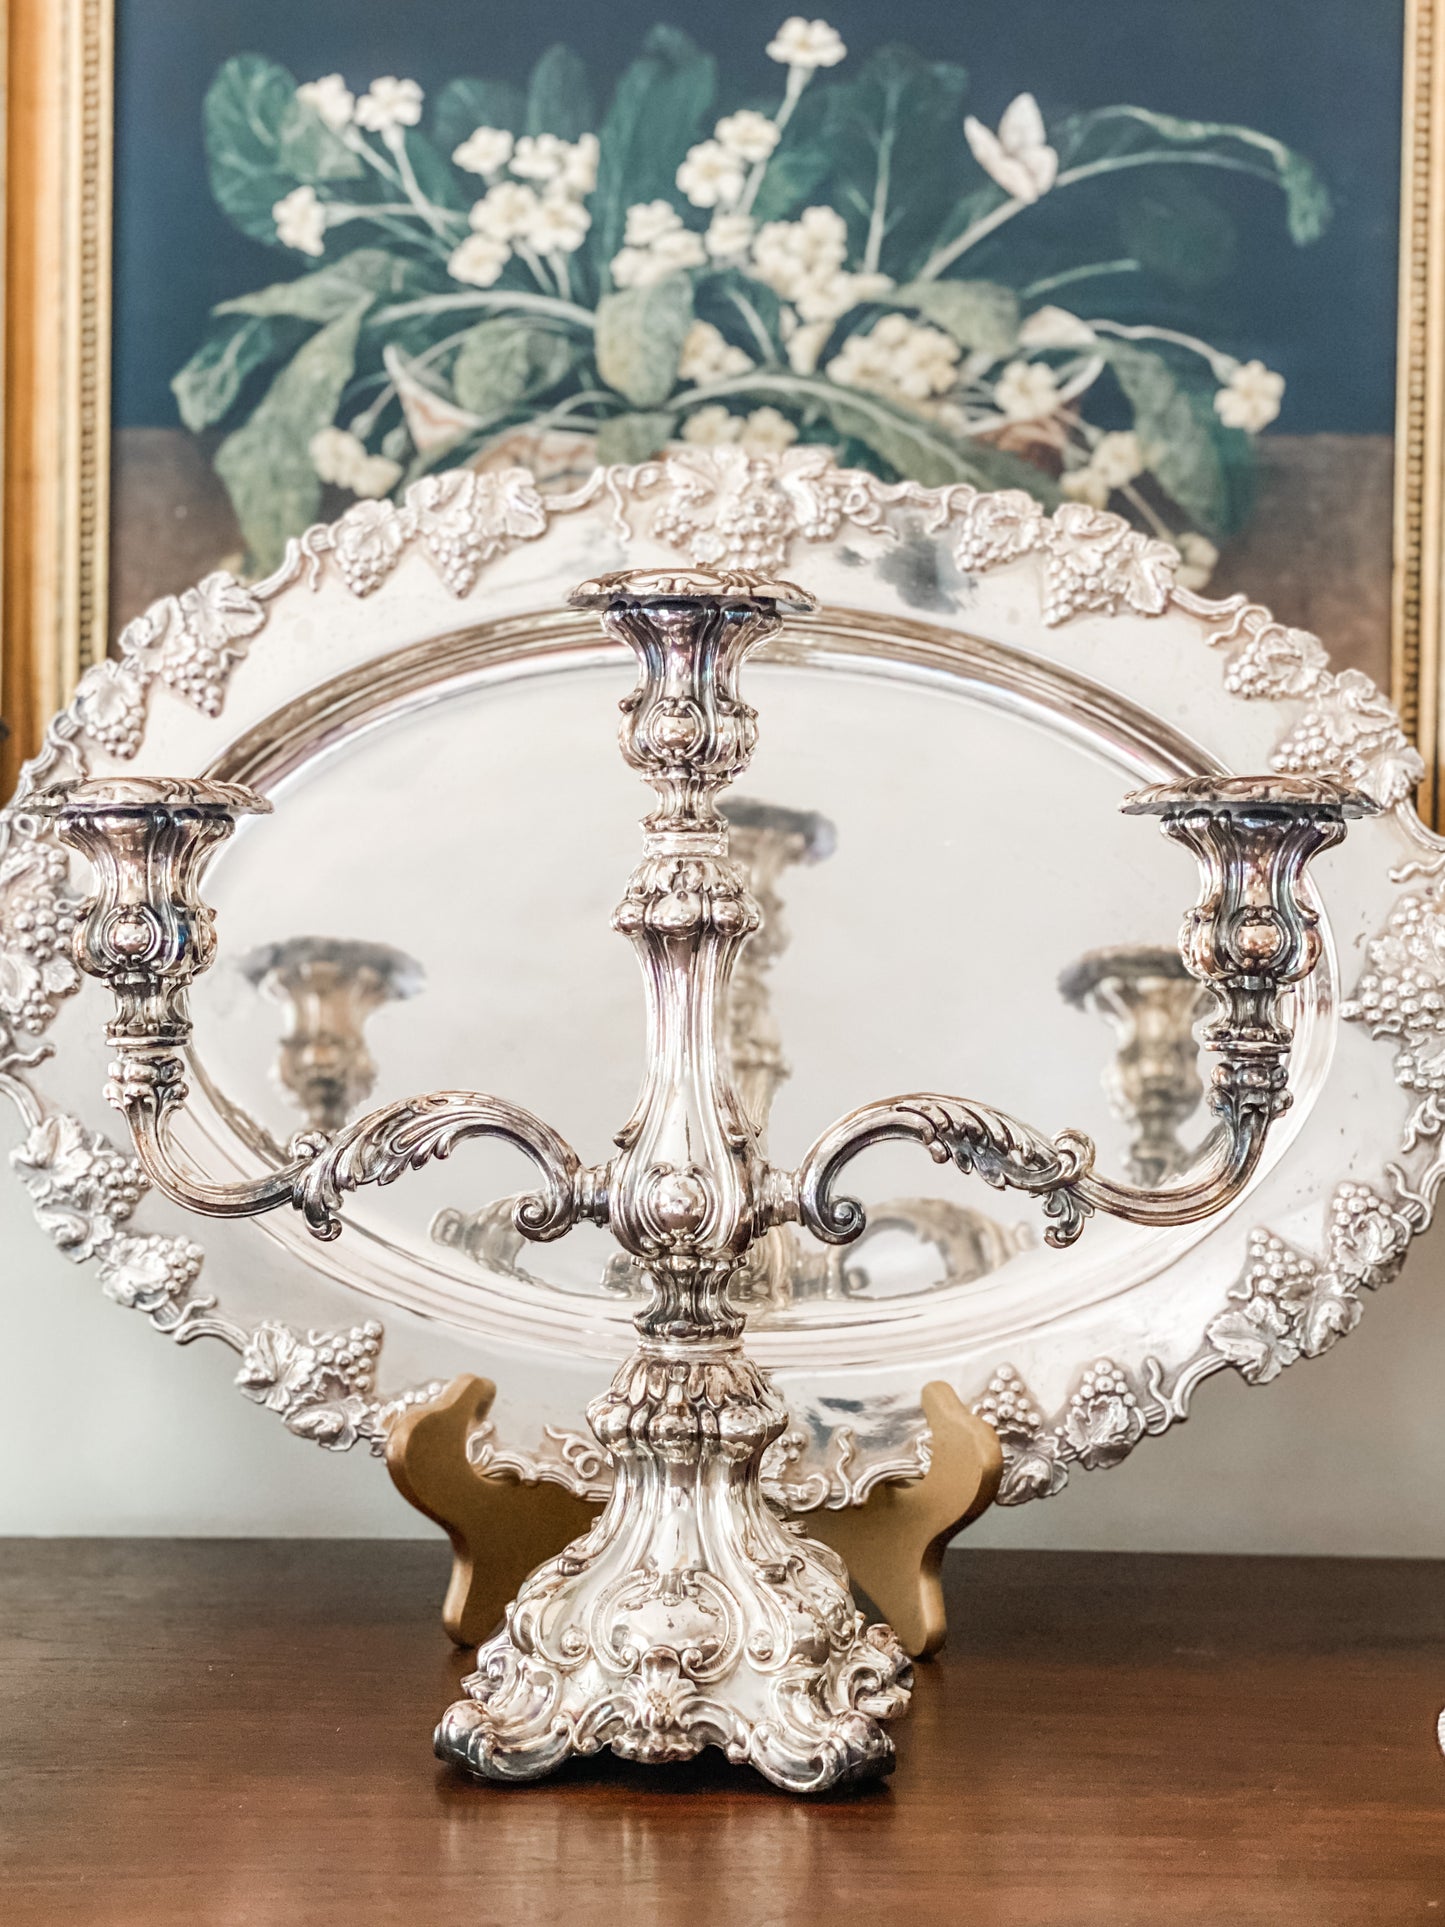 Exquisite Silver Plated Candelabra